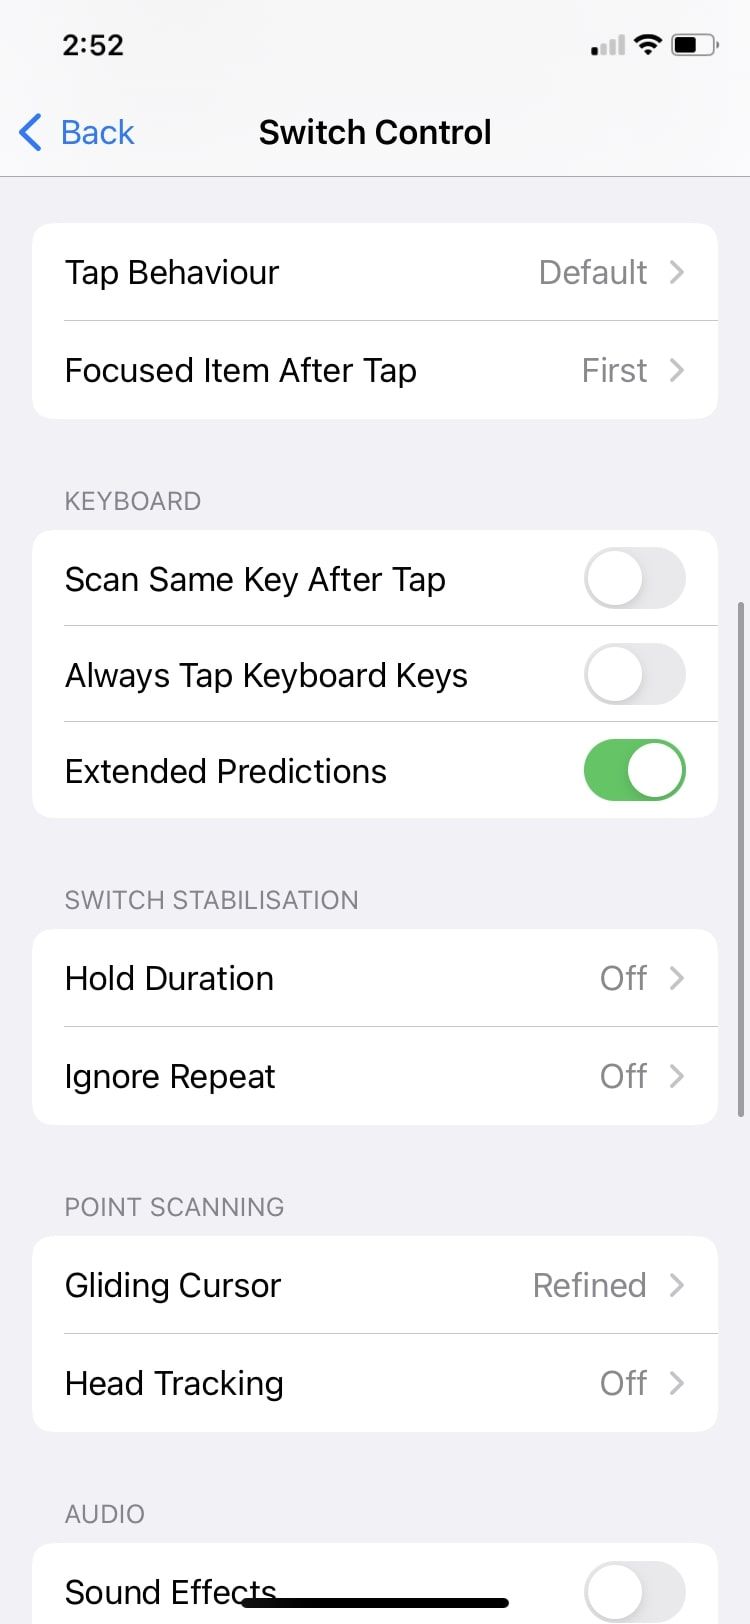 keyboard, switch stabilisation and point scanning